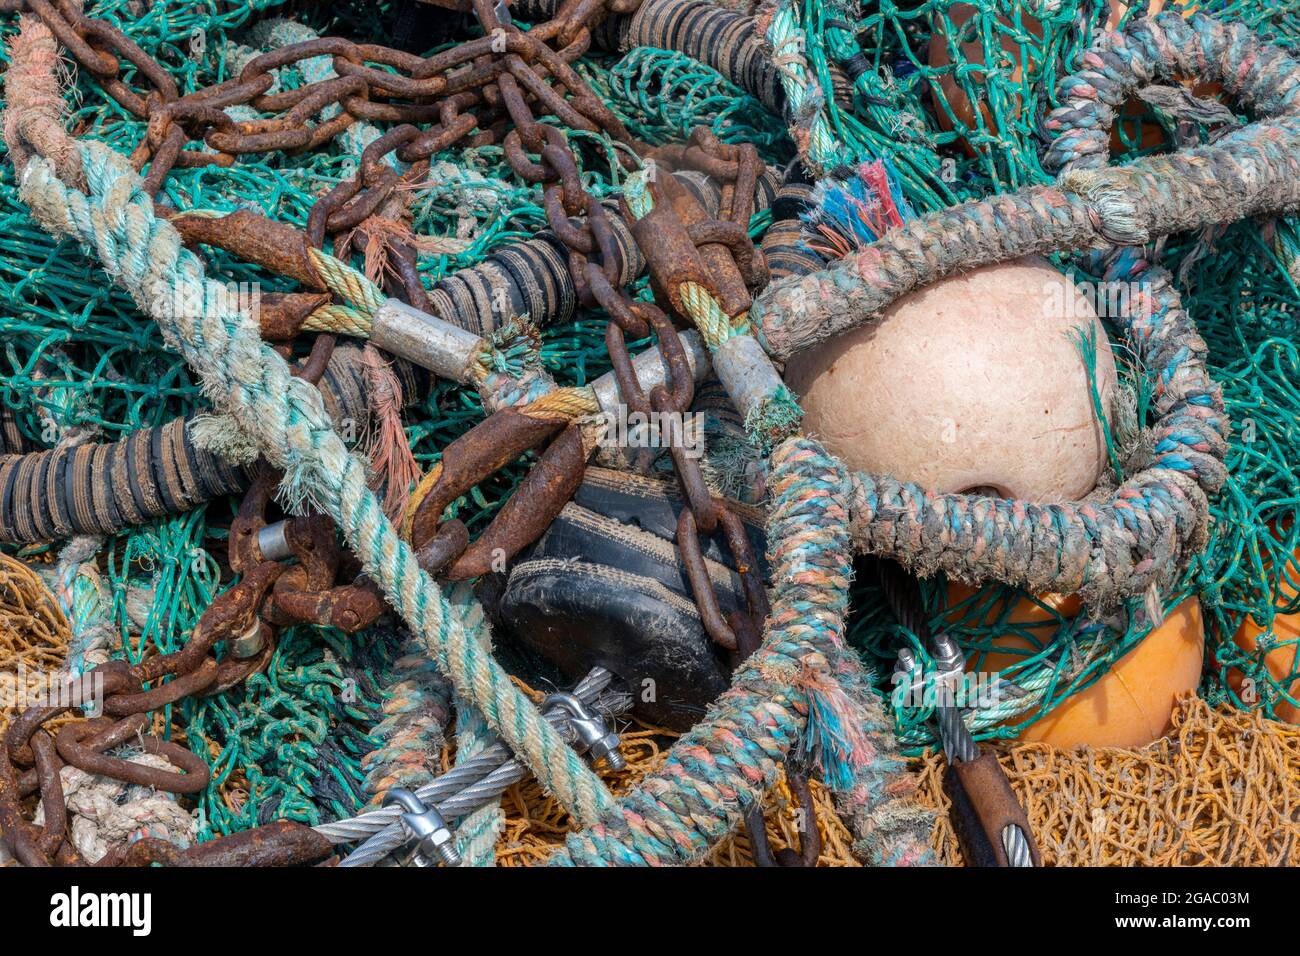 ropes and chains, fishing gear, fishing nets and chains, fishing